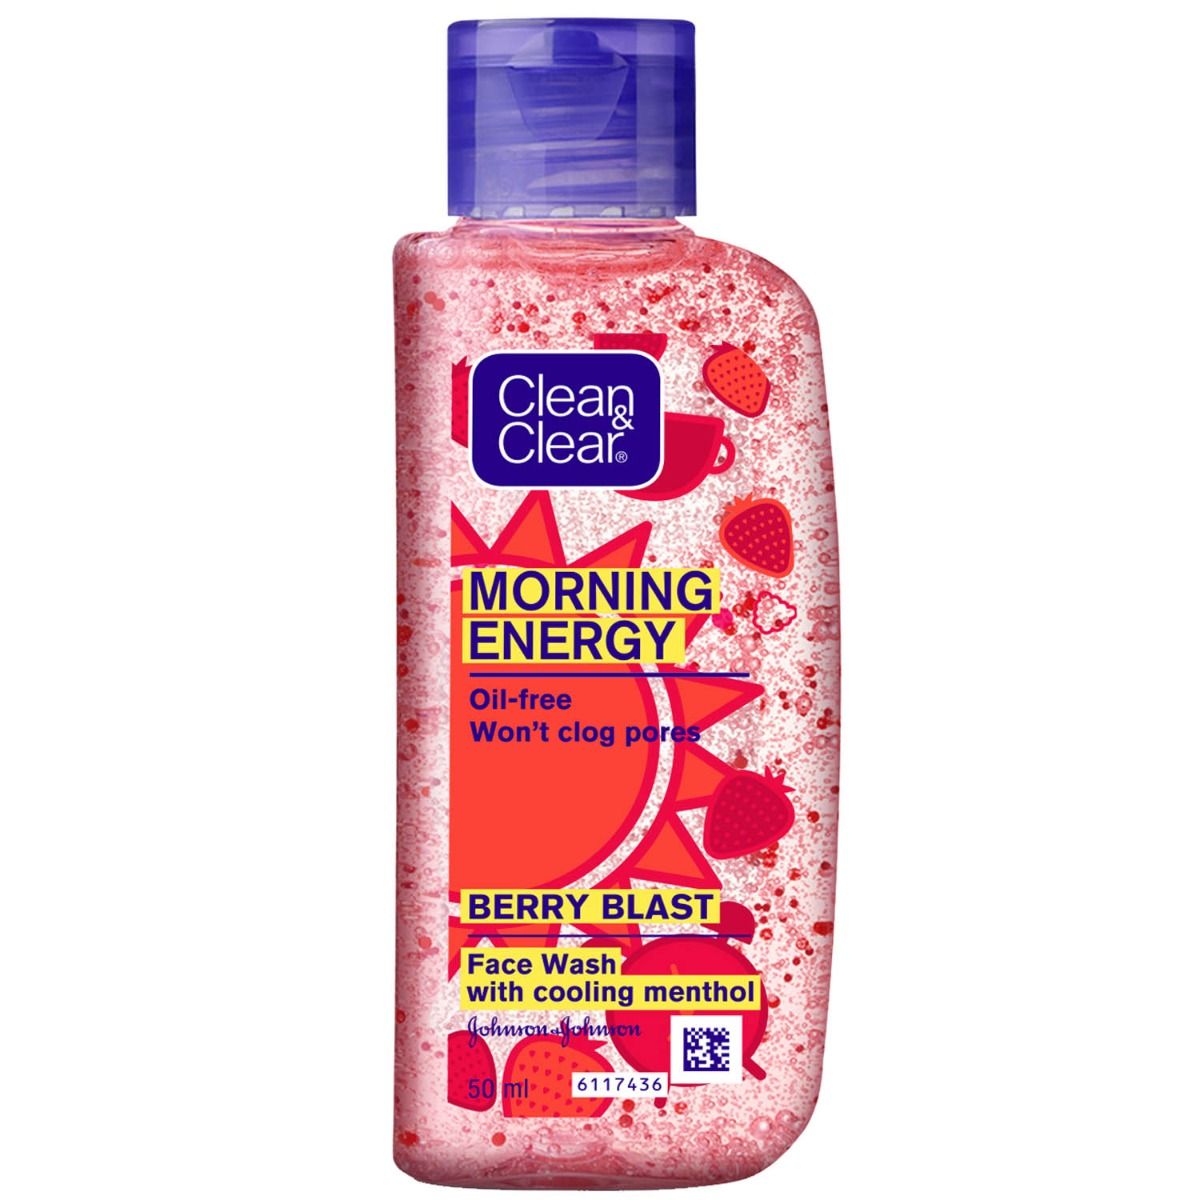 Clean & Clear Morning Energy Oil-Free Berry Blast Face Wash, 50 ml, Pack of 1 